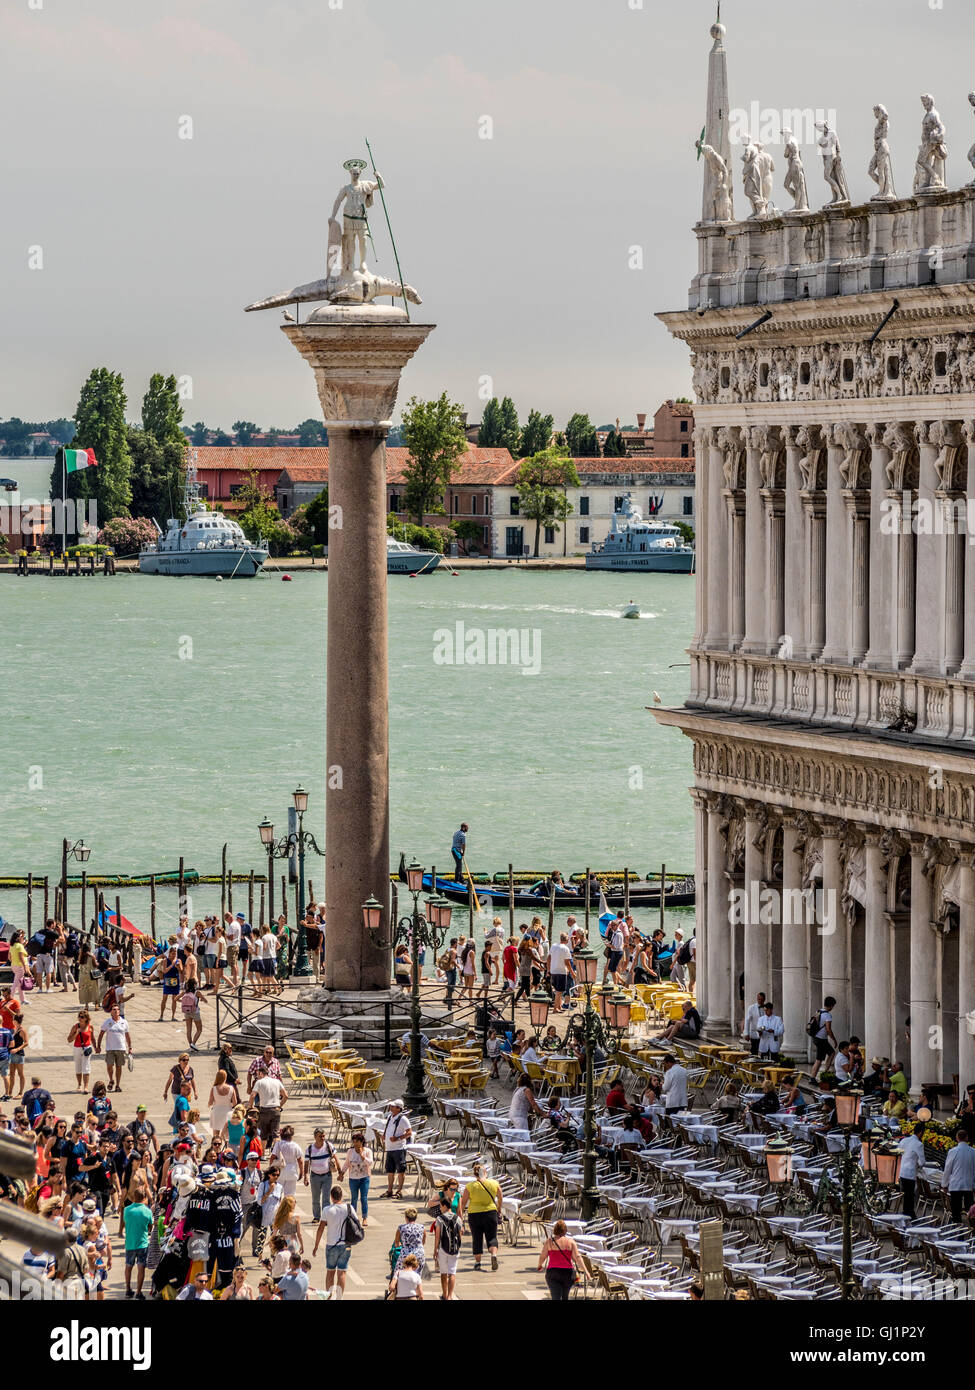 Piazzetta di San Marco along with Biblioteca Marciana and St Theodore's column, looking out towards Molo and St Mark's Basin. Stock Photo